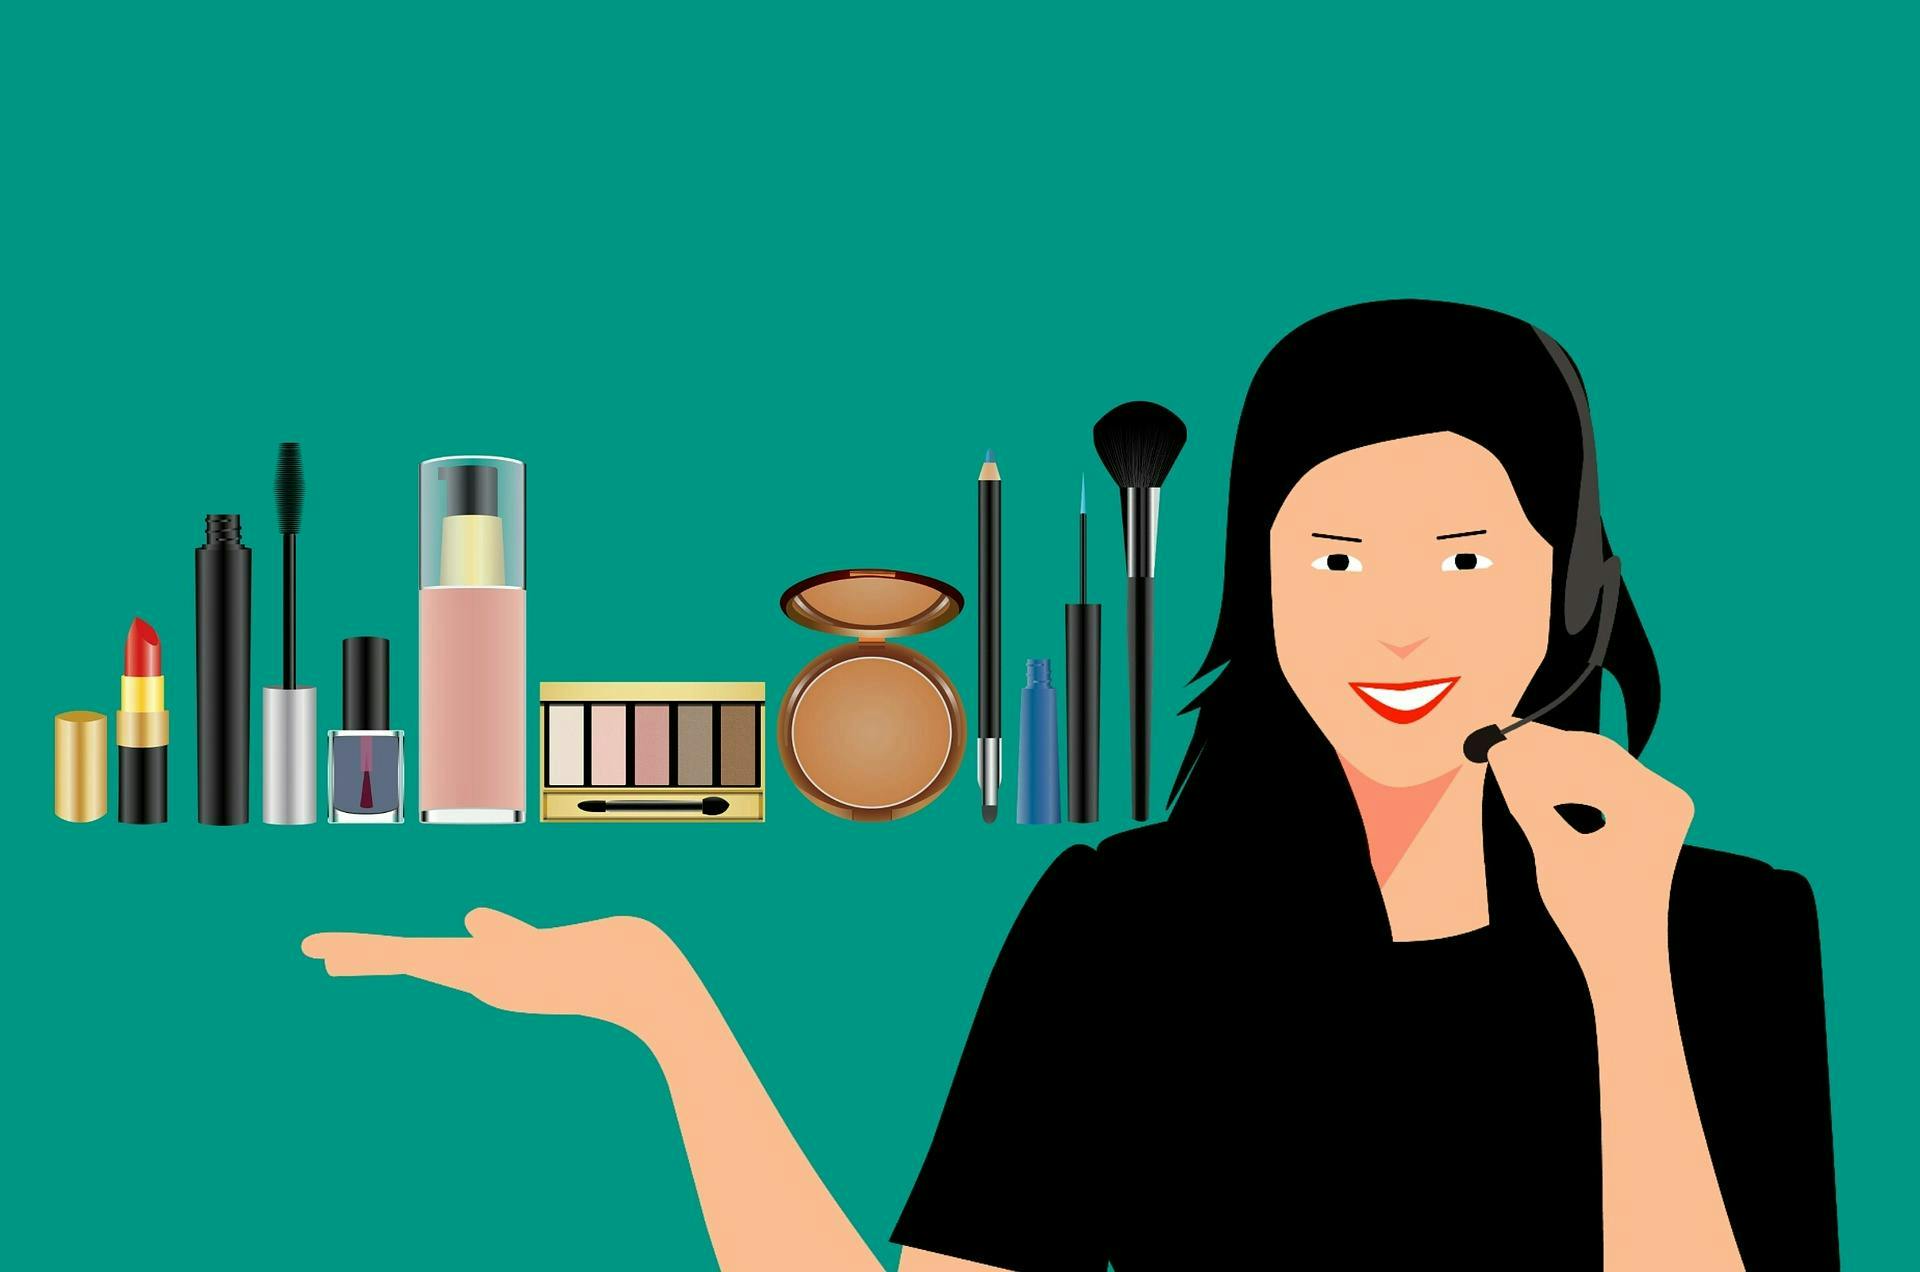 A cartoon illustration of a woman with a headset on and several makeup products she is marketing over the phone besides her